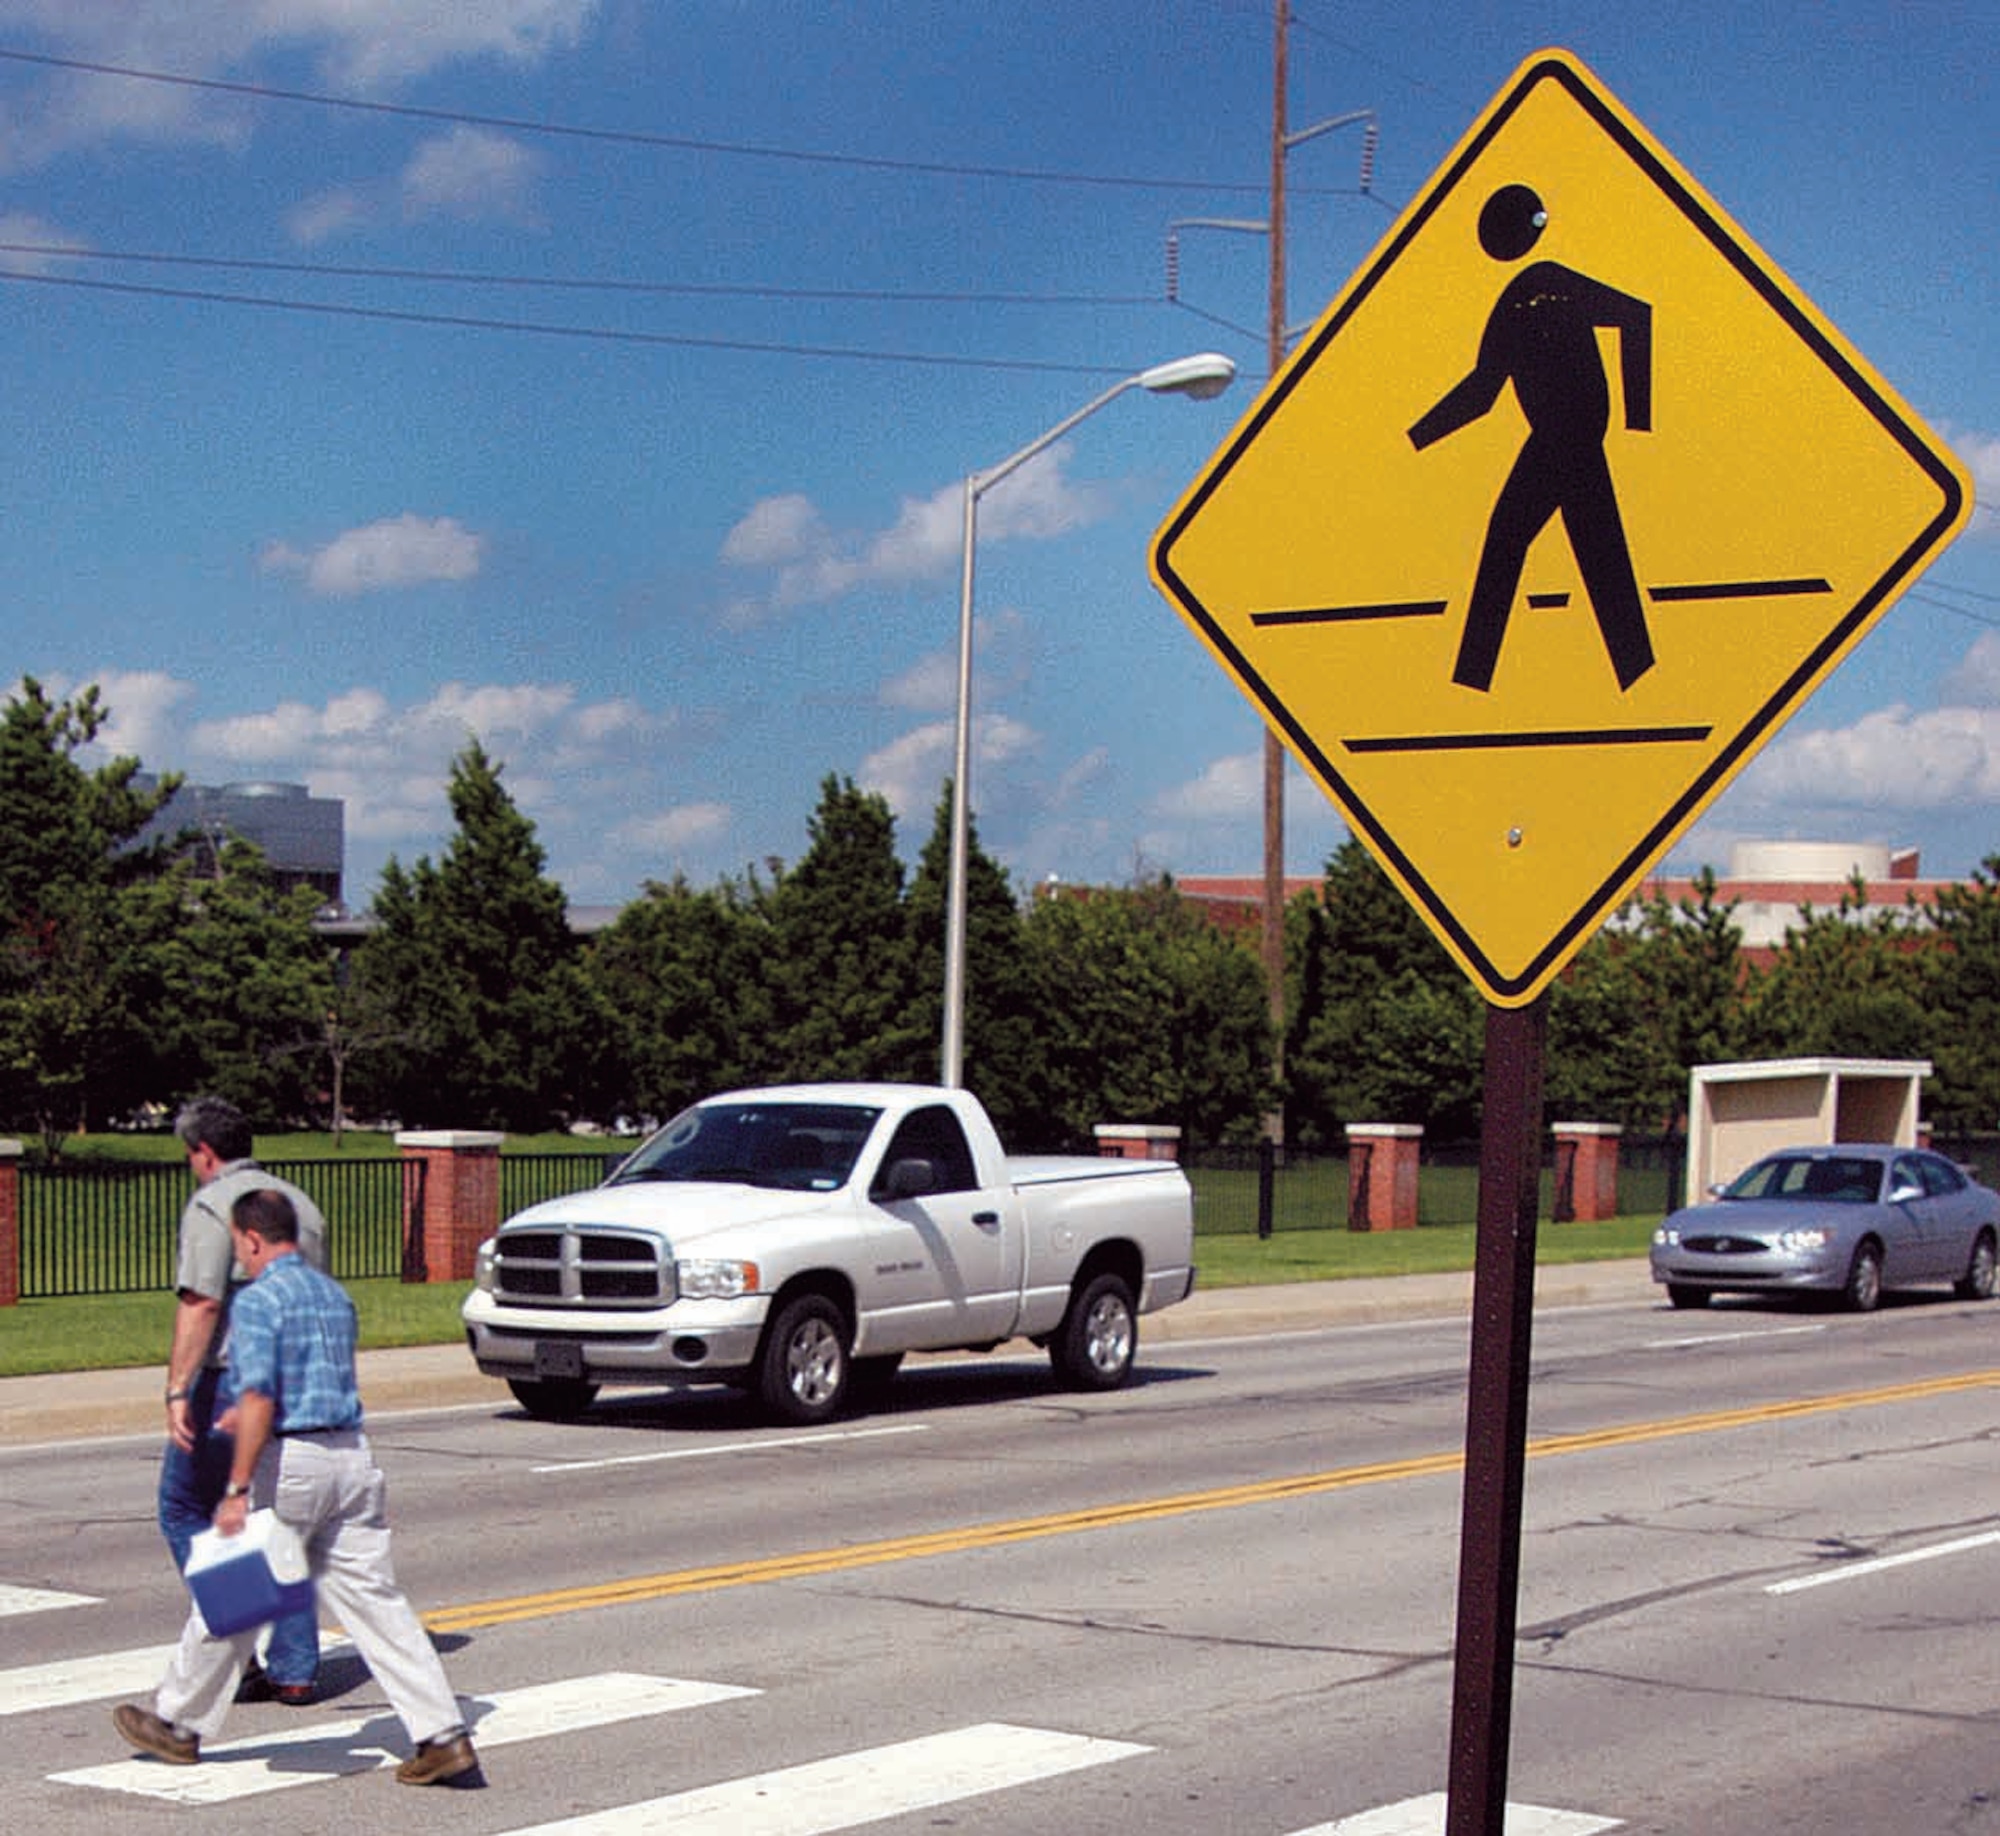 According to Oklahoma state law, pedestrians who do not use a crosswalk must yield the right of way to vehicles. Pedestrians should always make eye contact with drivers before crossing the street. (Air Force photo by Margo Wright)